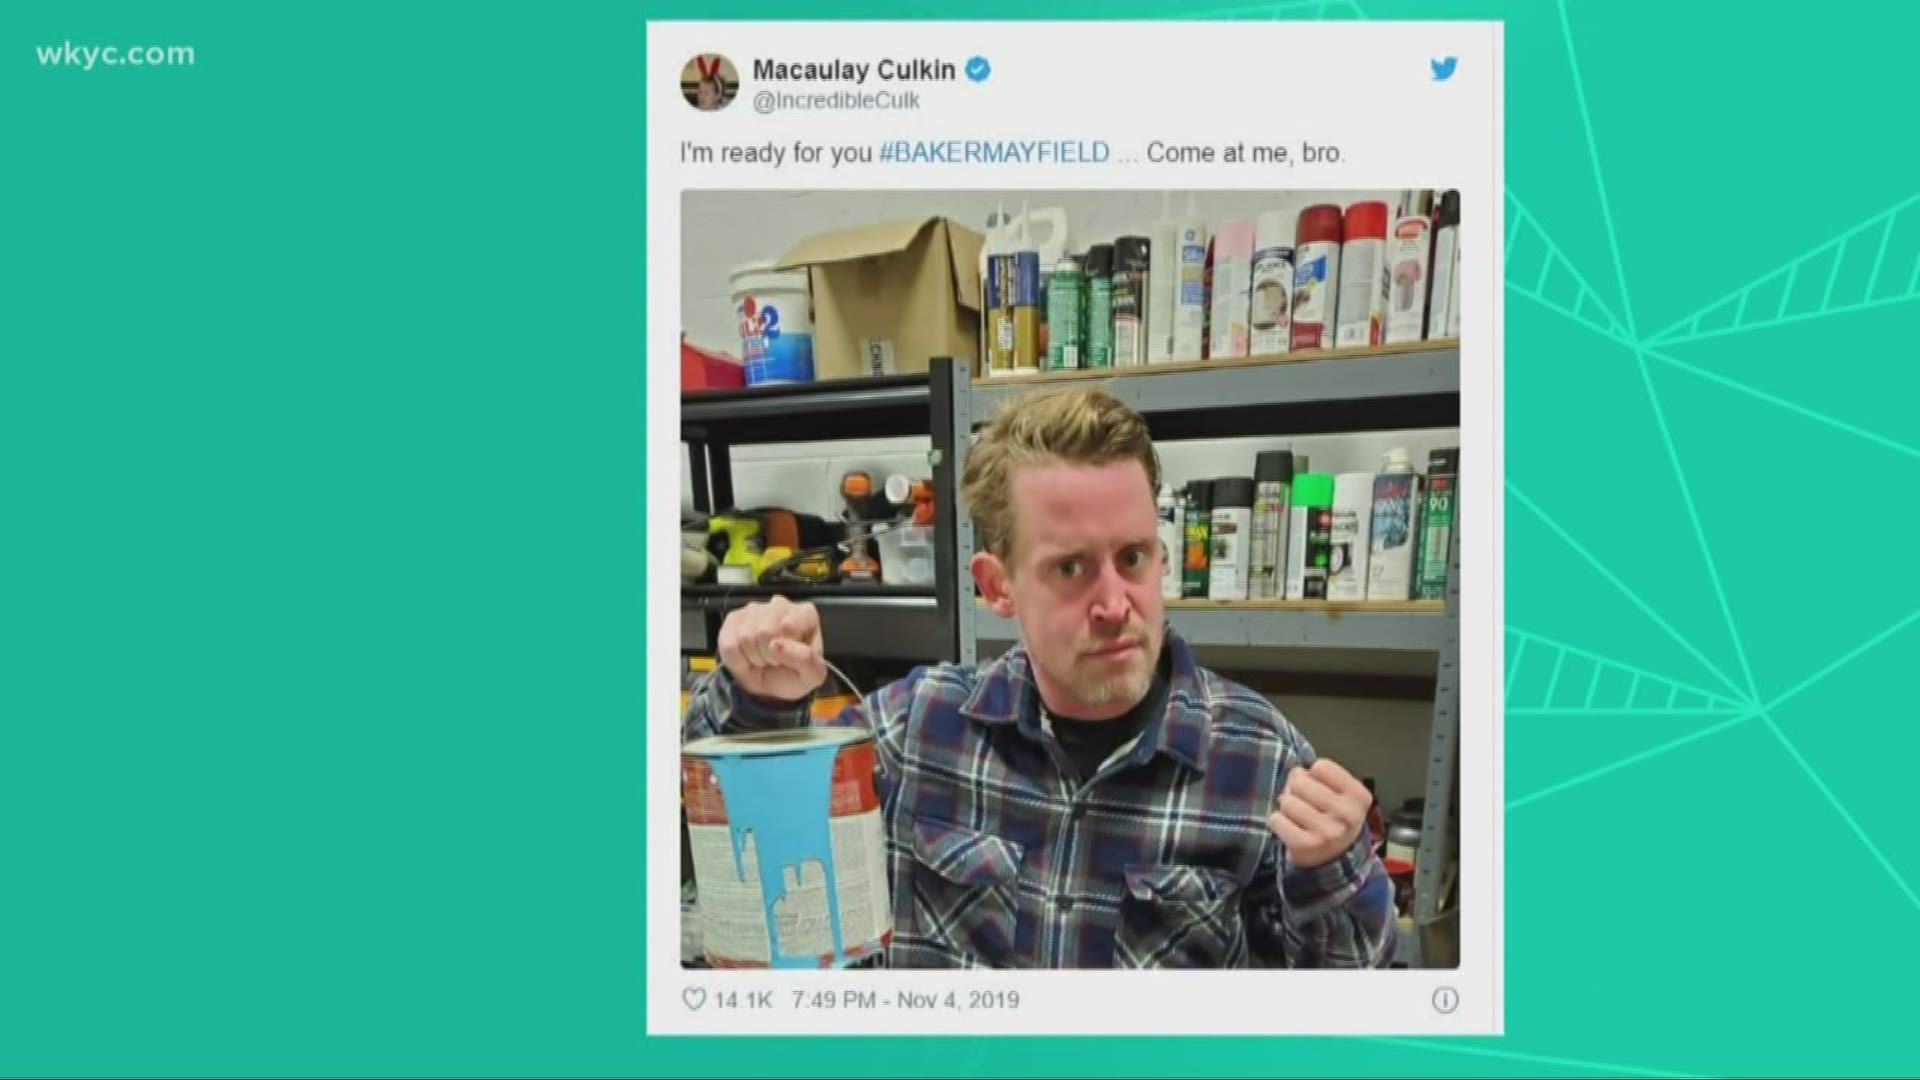 When somebody compared Baker Mayfield’s look to the 'Wet Bandits' from 'Home Alone,' Culkin took to Twitter with a photo of himself holding a paint can.